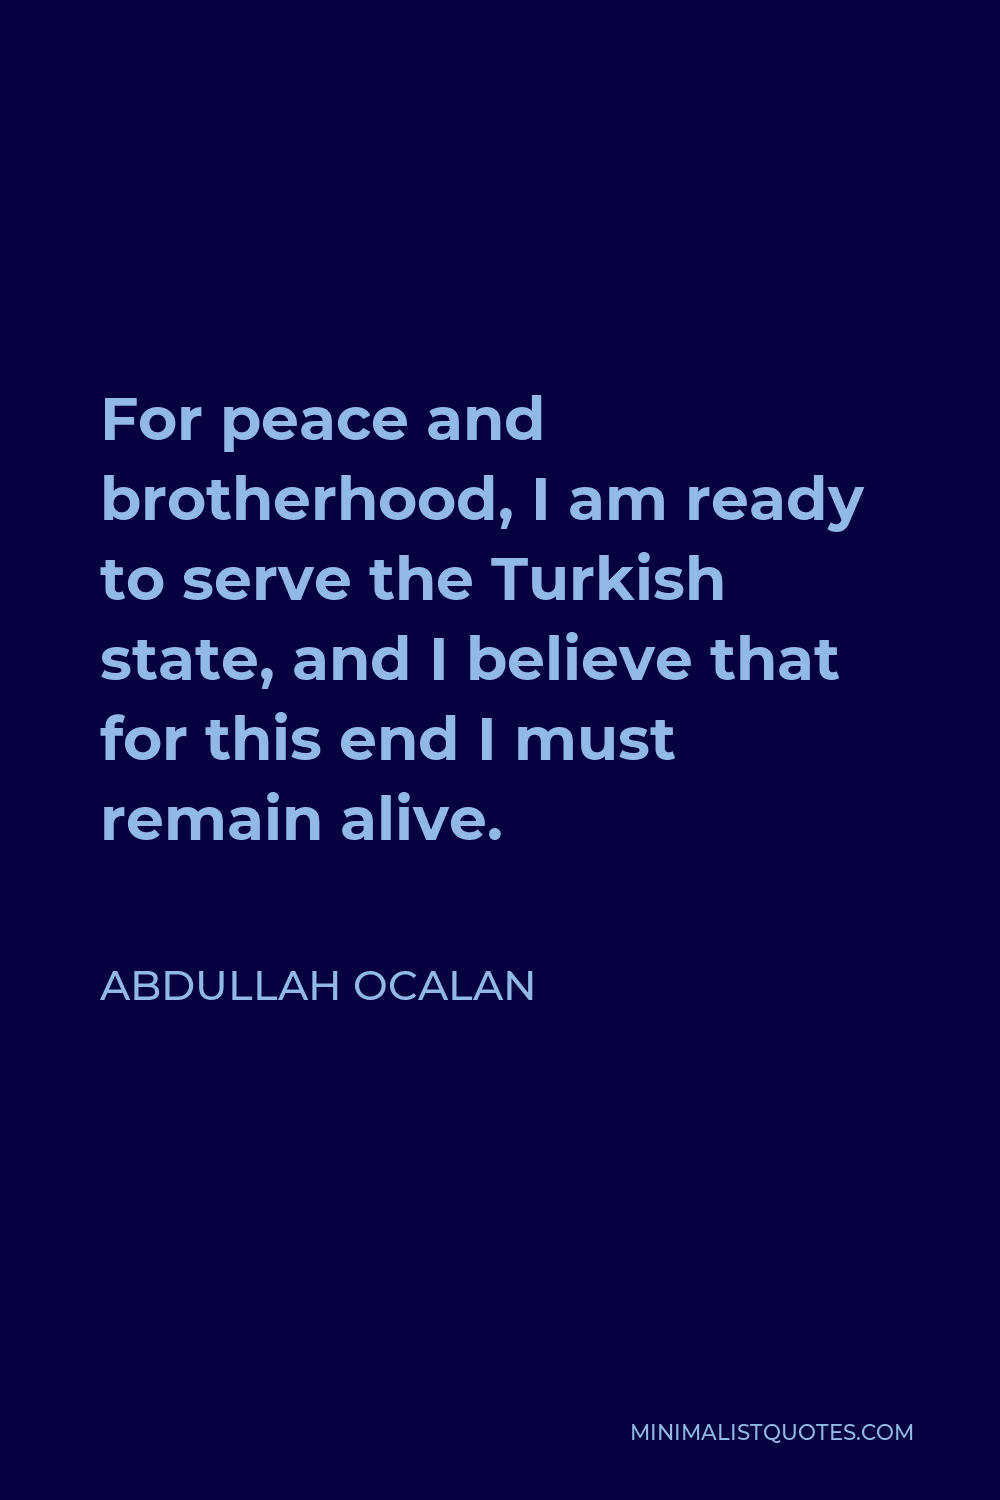 Abdullah Ocalan Quote - For peace and brotherhood, I am ready to serve the Turkish state, and I believe that for this end I must remain alive.